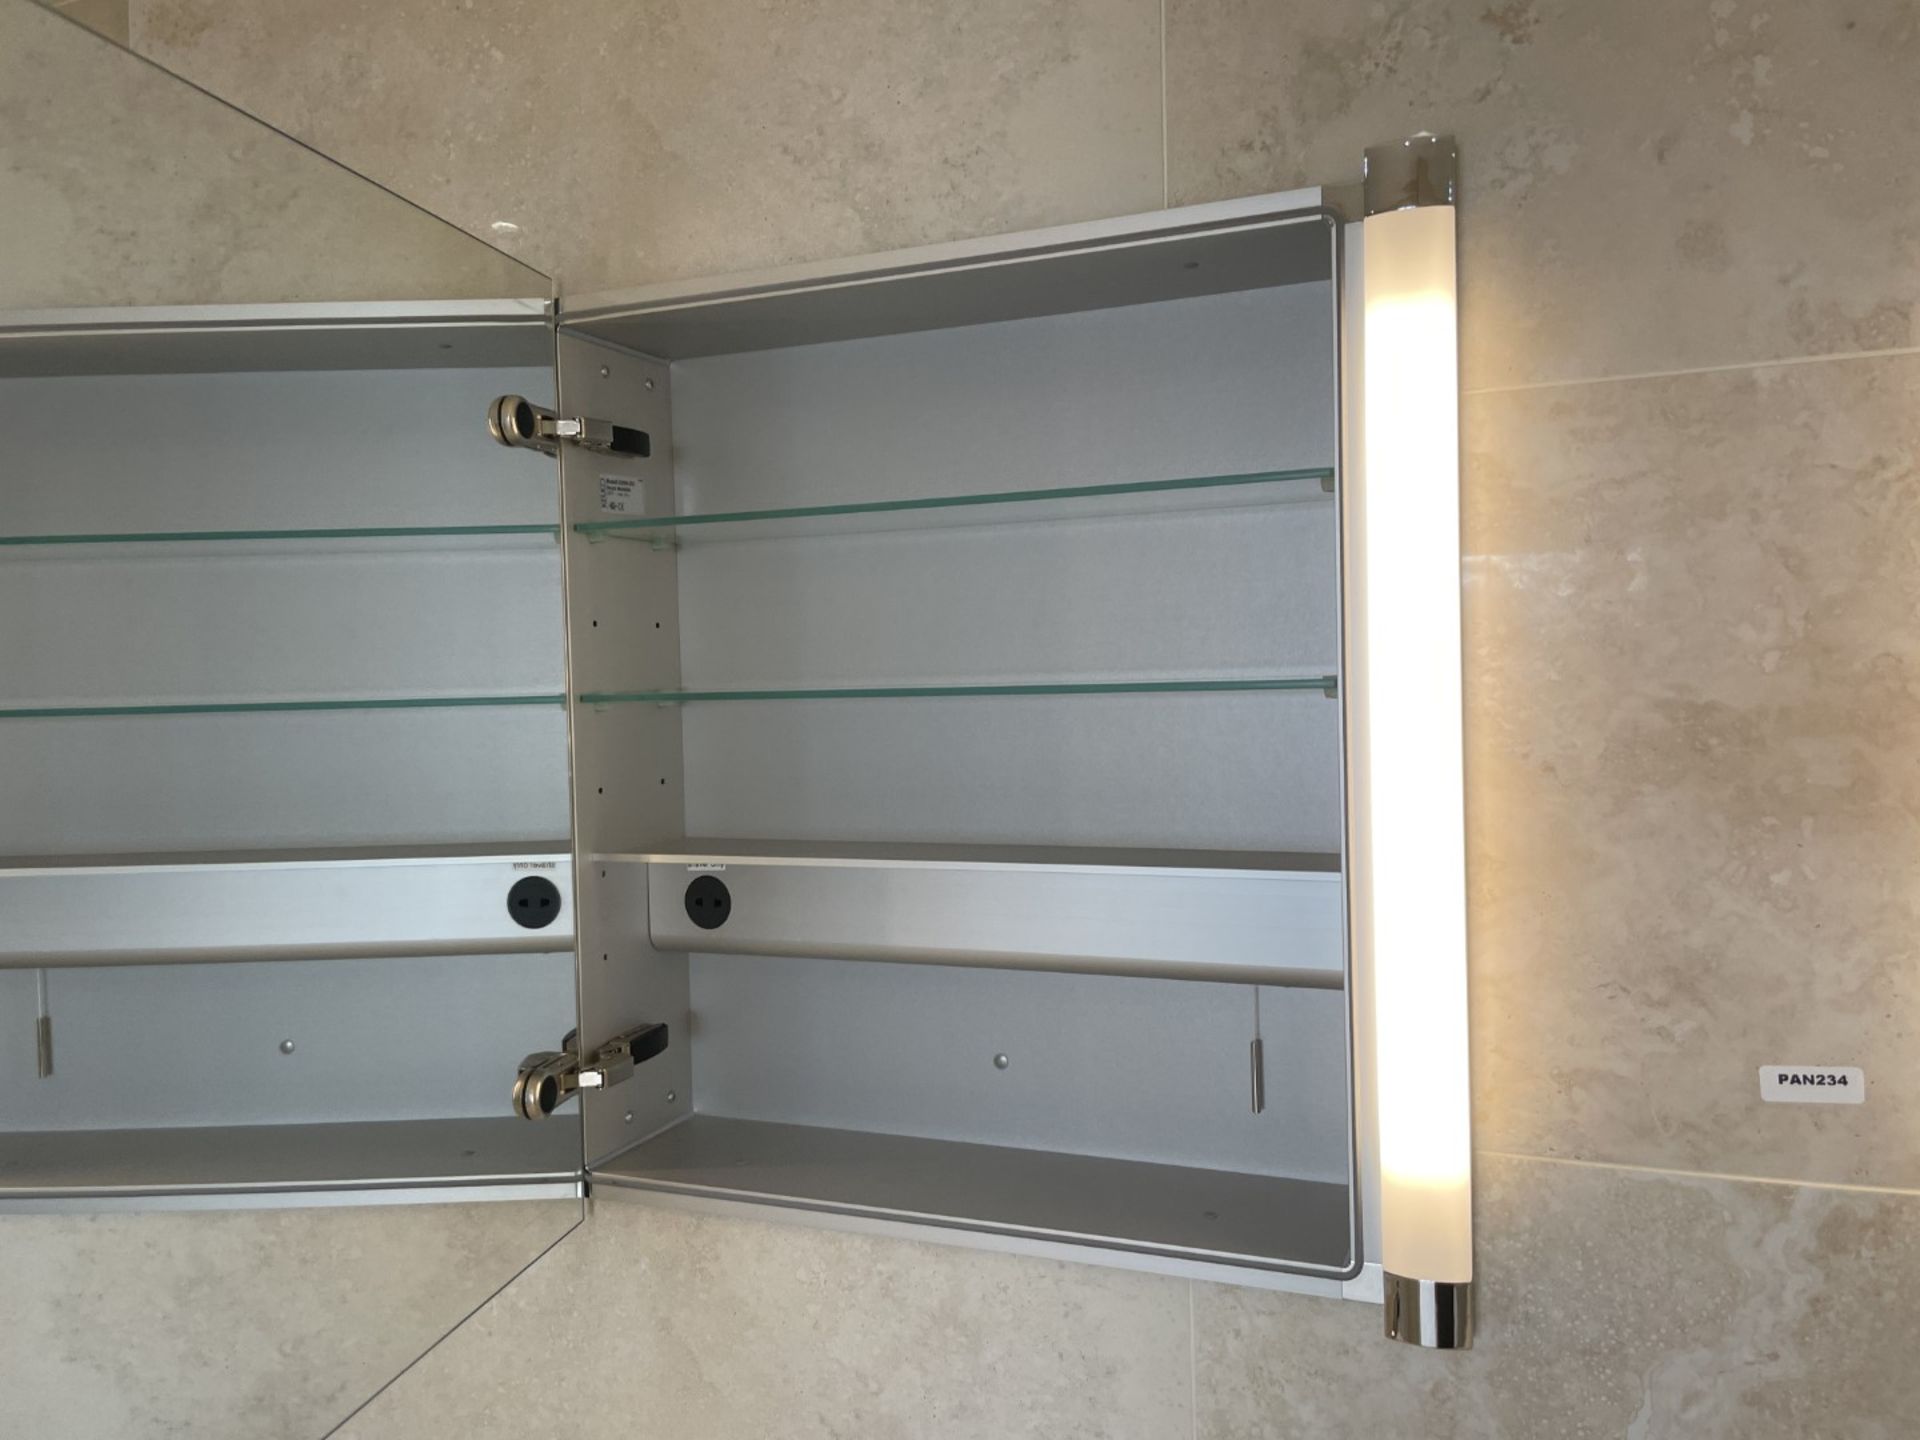 2 x KEUCO Illuminated Mirrored Wall Mounted Cabinets - Total Original Value: £2,000 - Ref: - Image 15 of 19